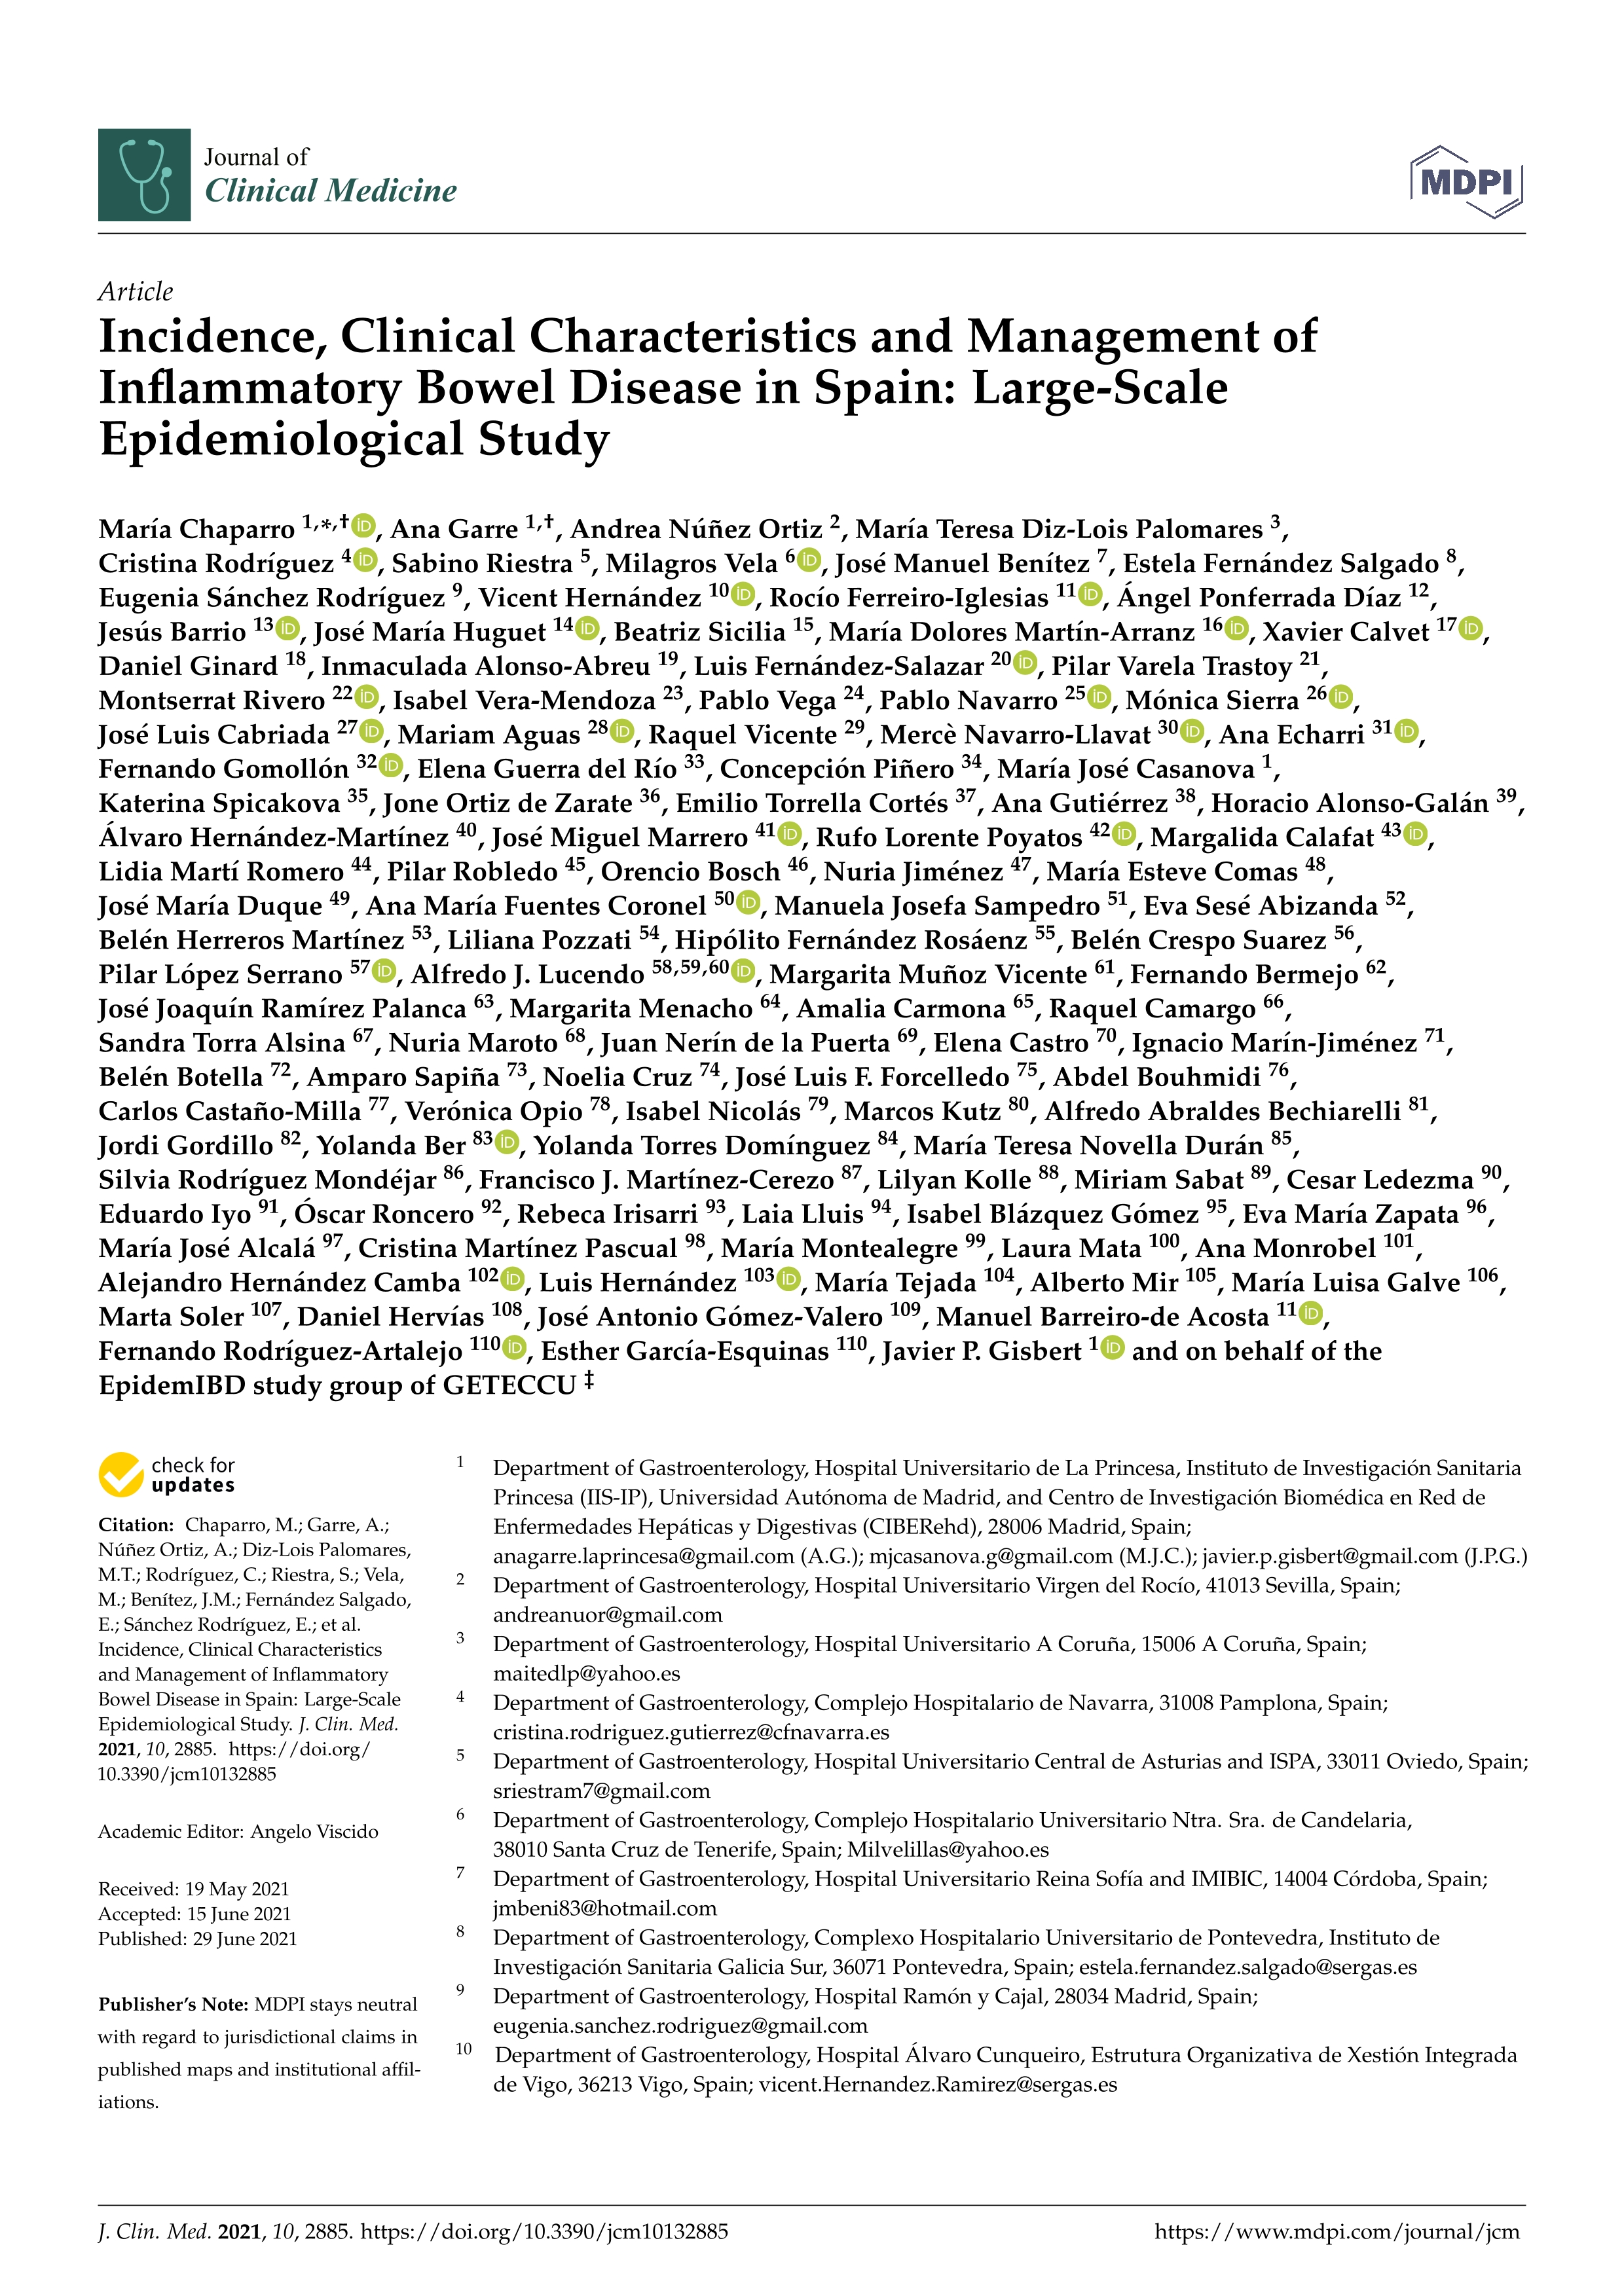 Incidence, clinical characteristics and management of inflammatory bowel disease in Spain: large-scale epidemiological study